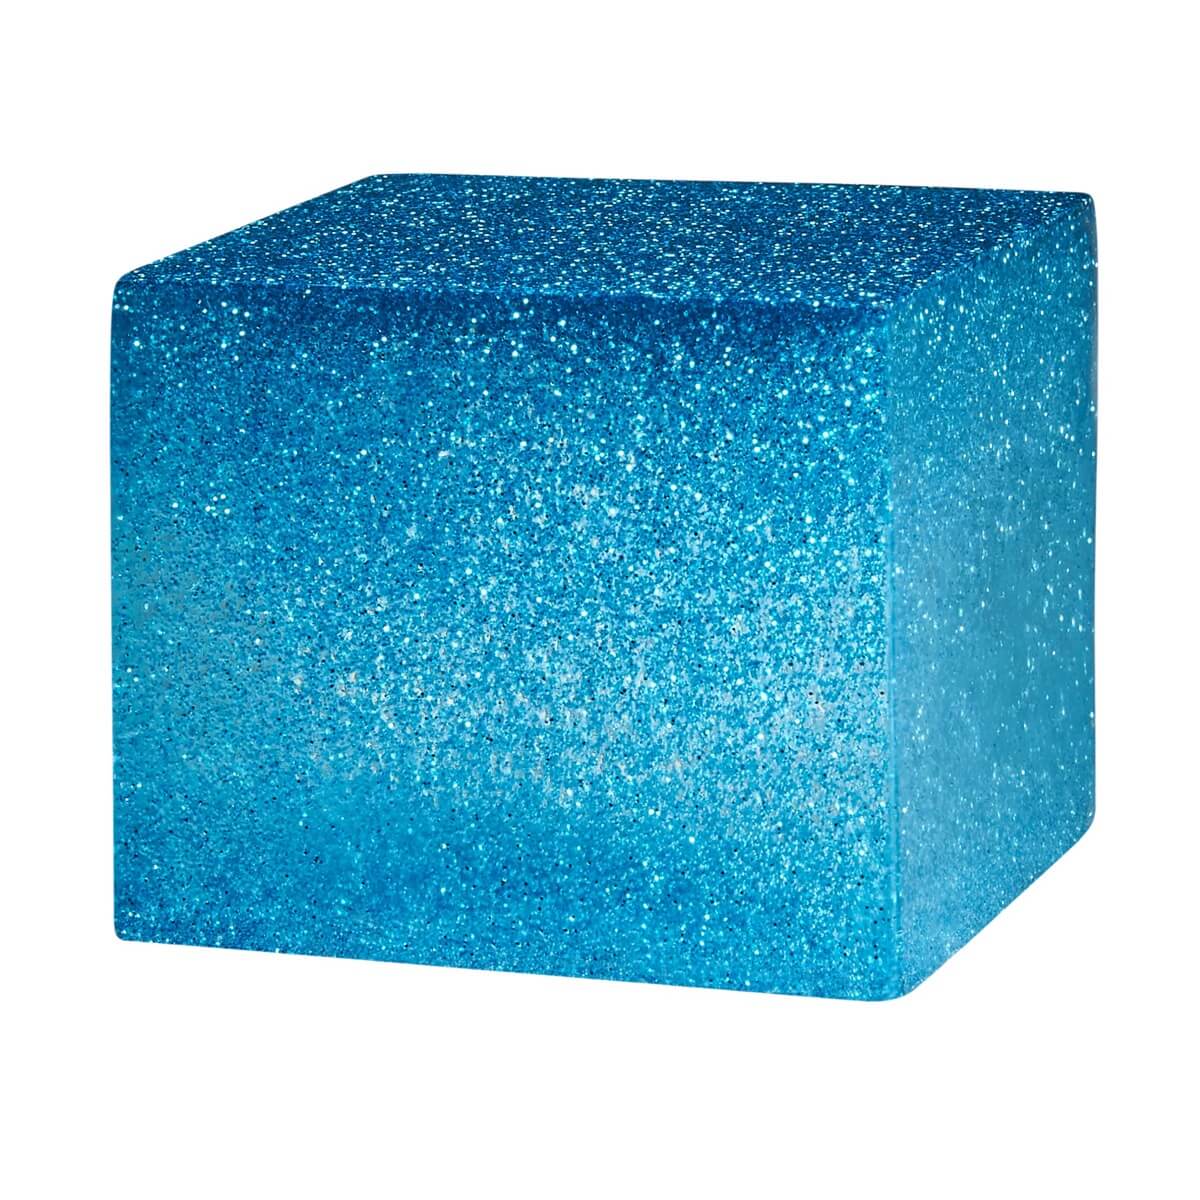 A resin cube made with the Blue Glitter Mica Powder Pigment by Pigmently